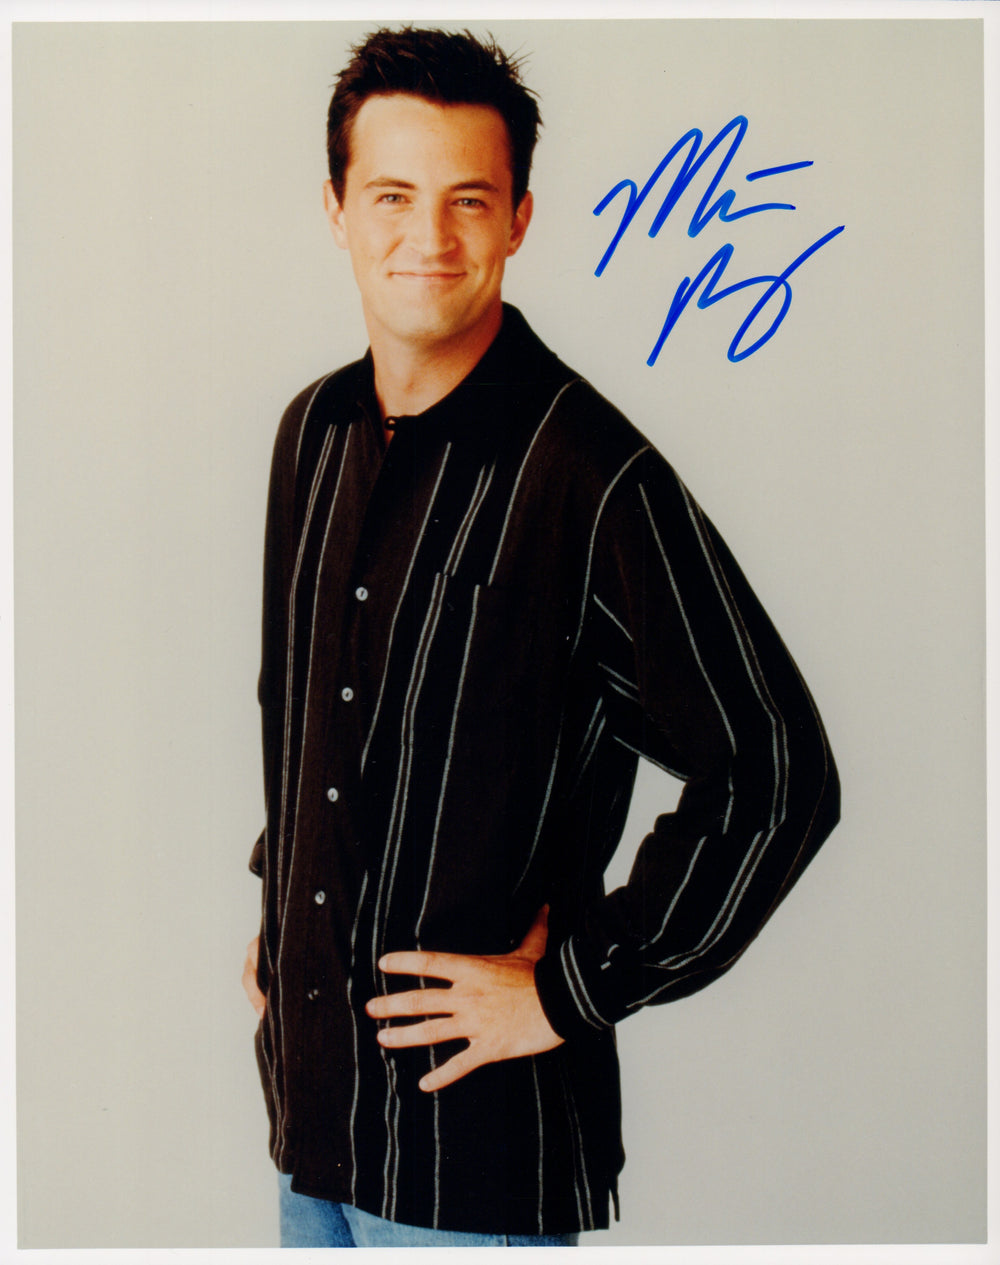 Matthew Perry as Chandler Bing from Friends Signed 8x10 Photo